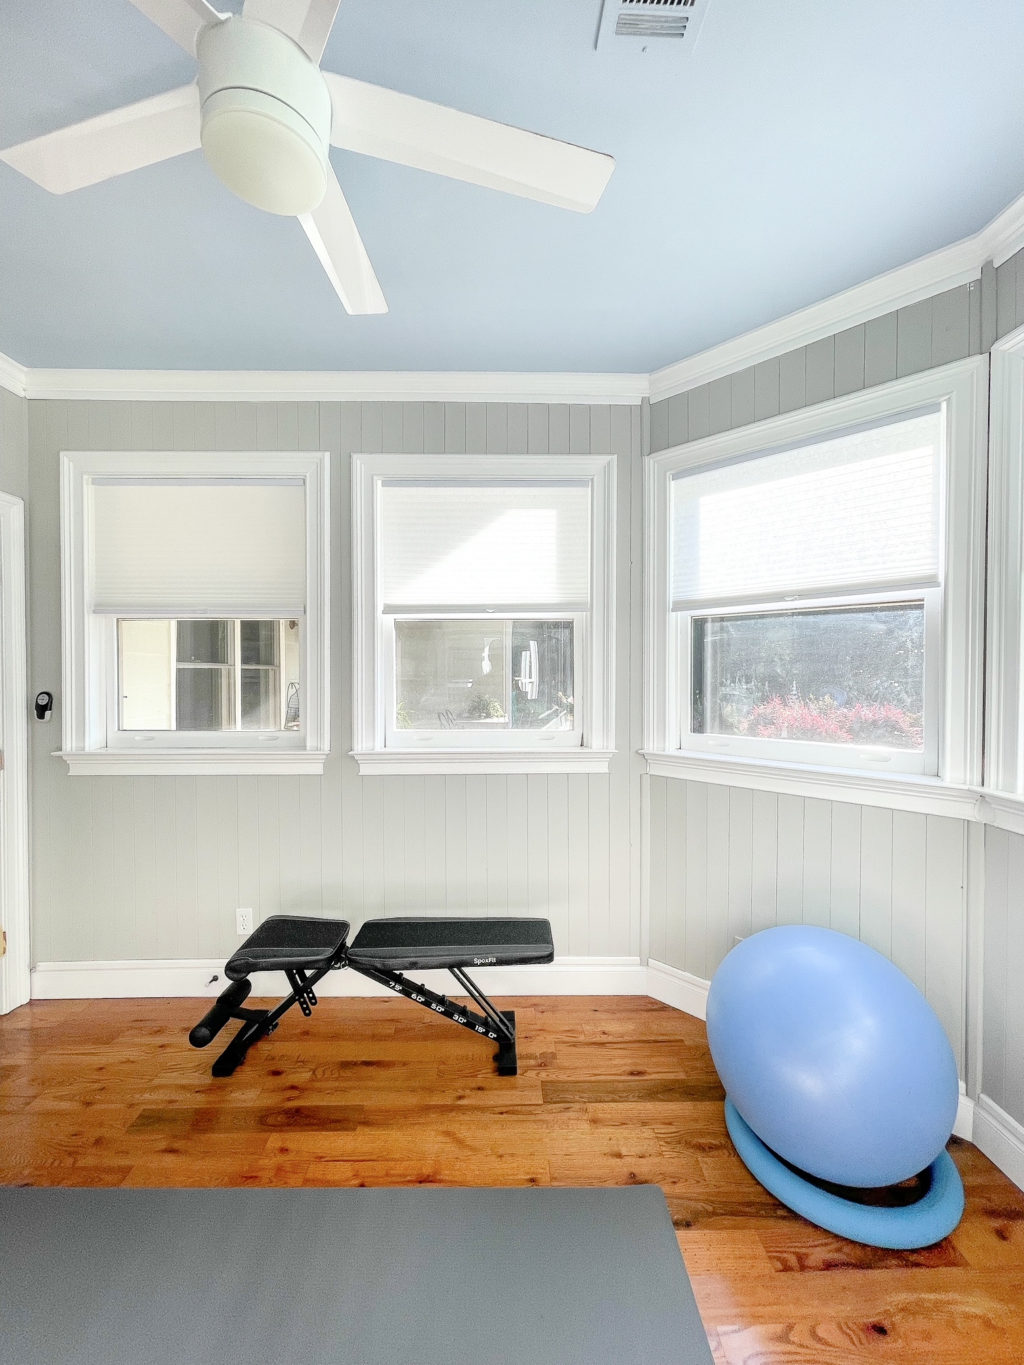 Small home gym with a weight bench and blue exercise ball.